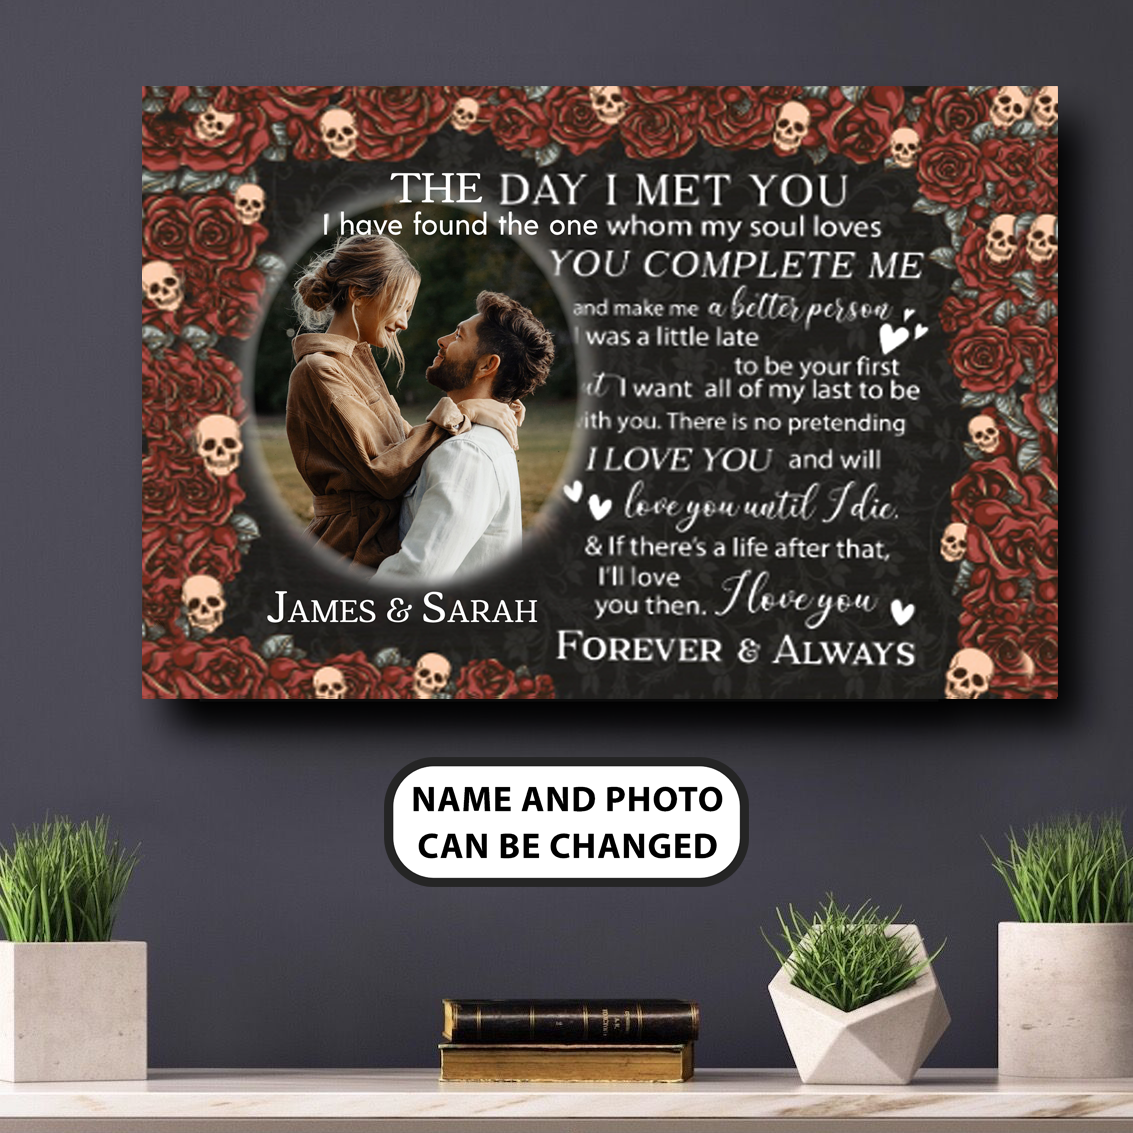 PresentsPrints, The Day I Met You. Personalized Canvas, Weeding Gift, Valentine Gift, Anniversary Gift For Her for Him